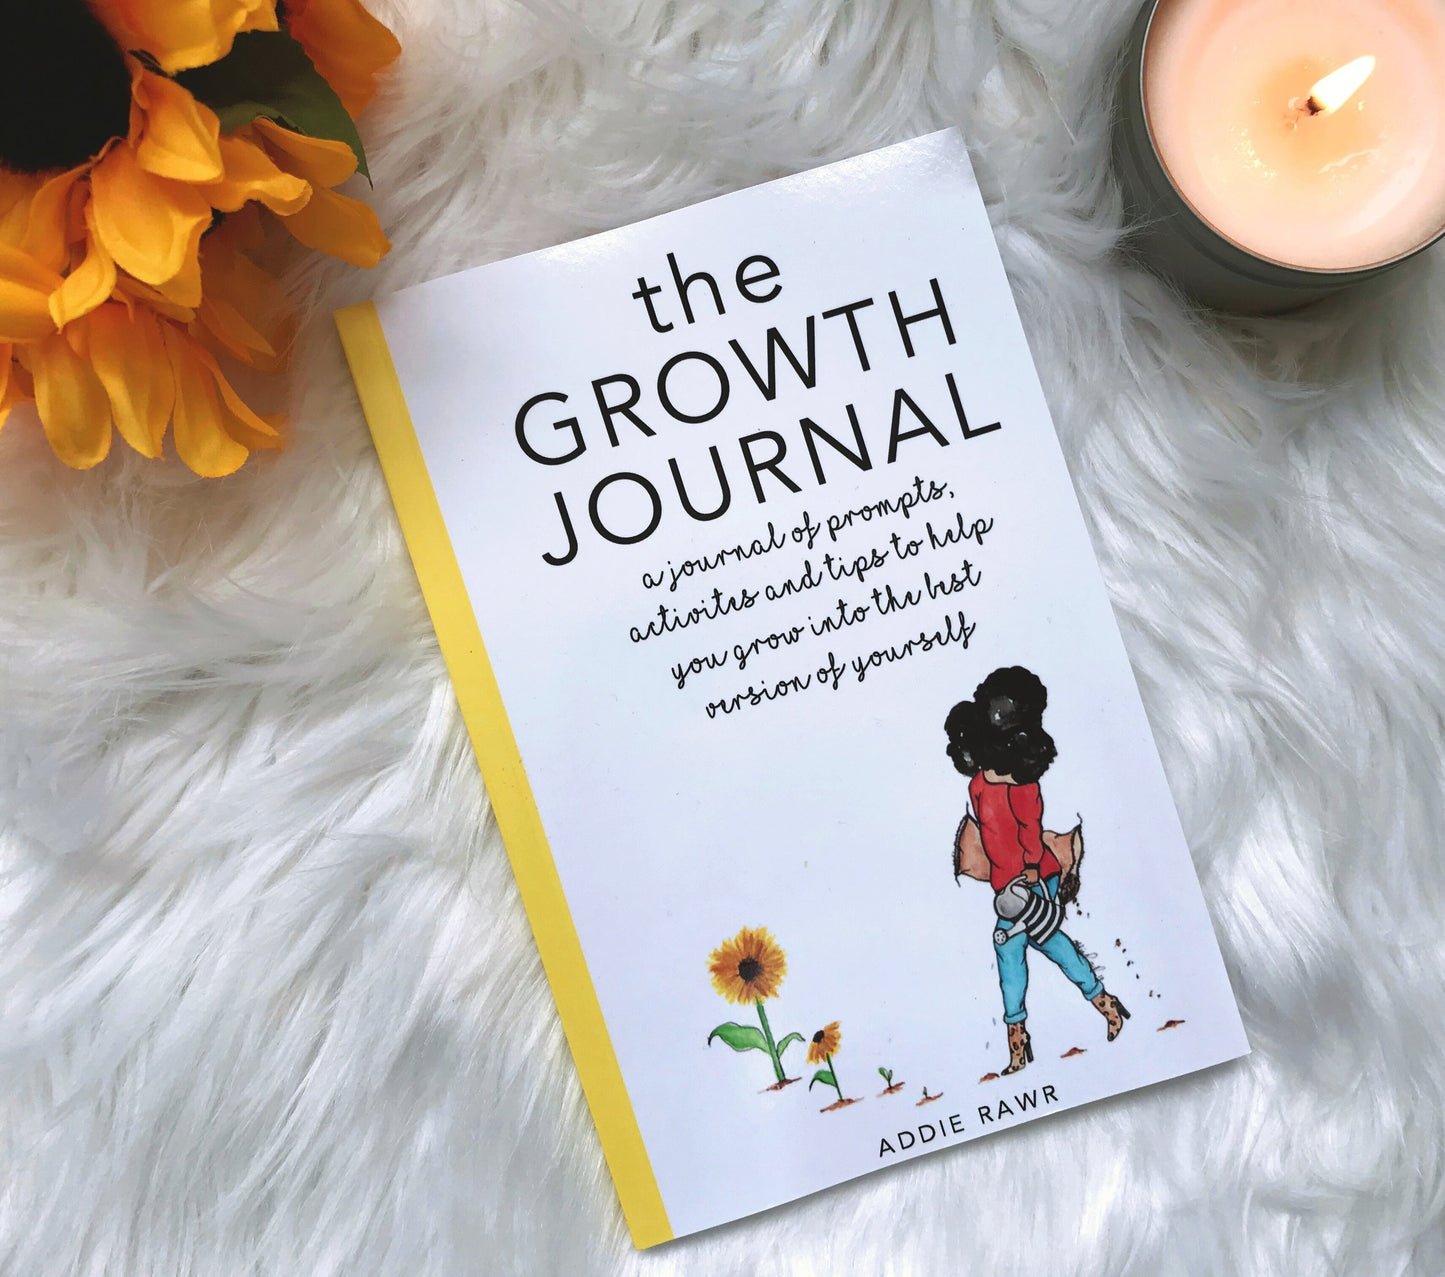 The Growth Journal